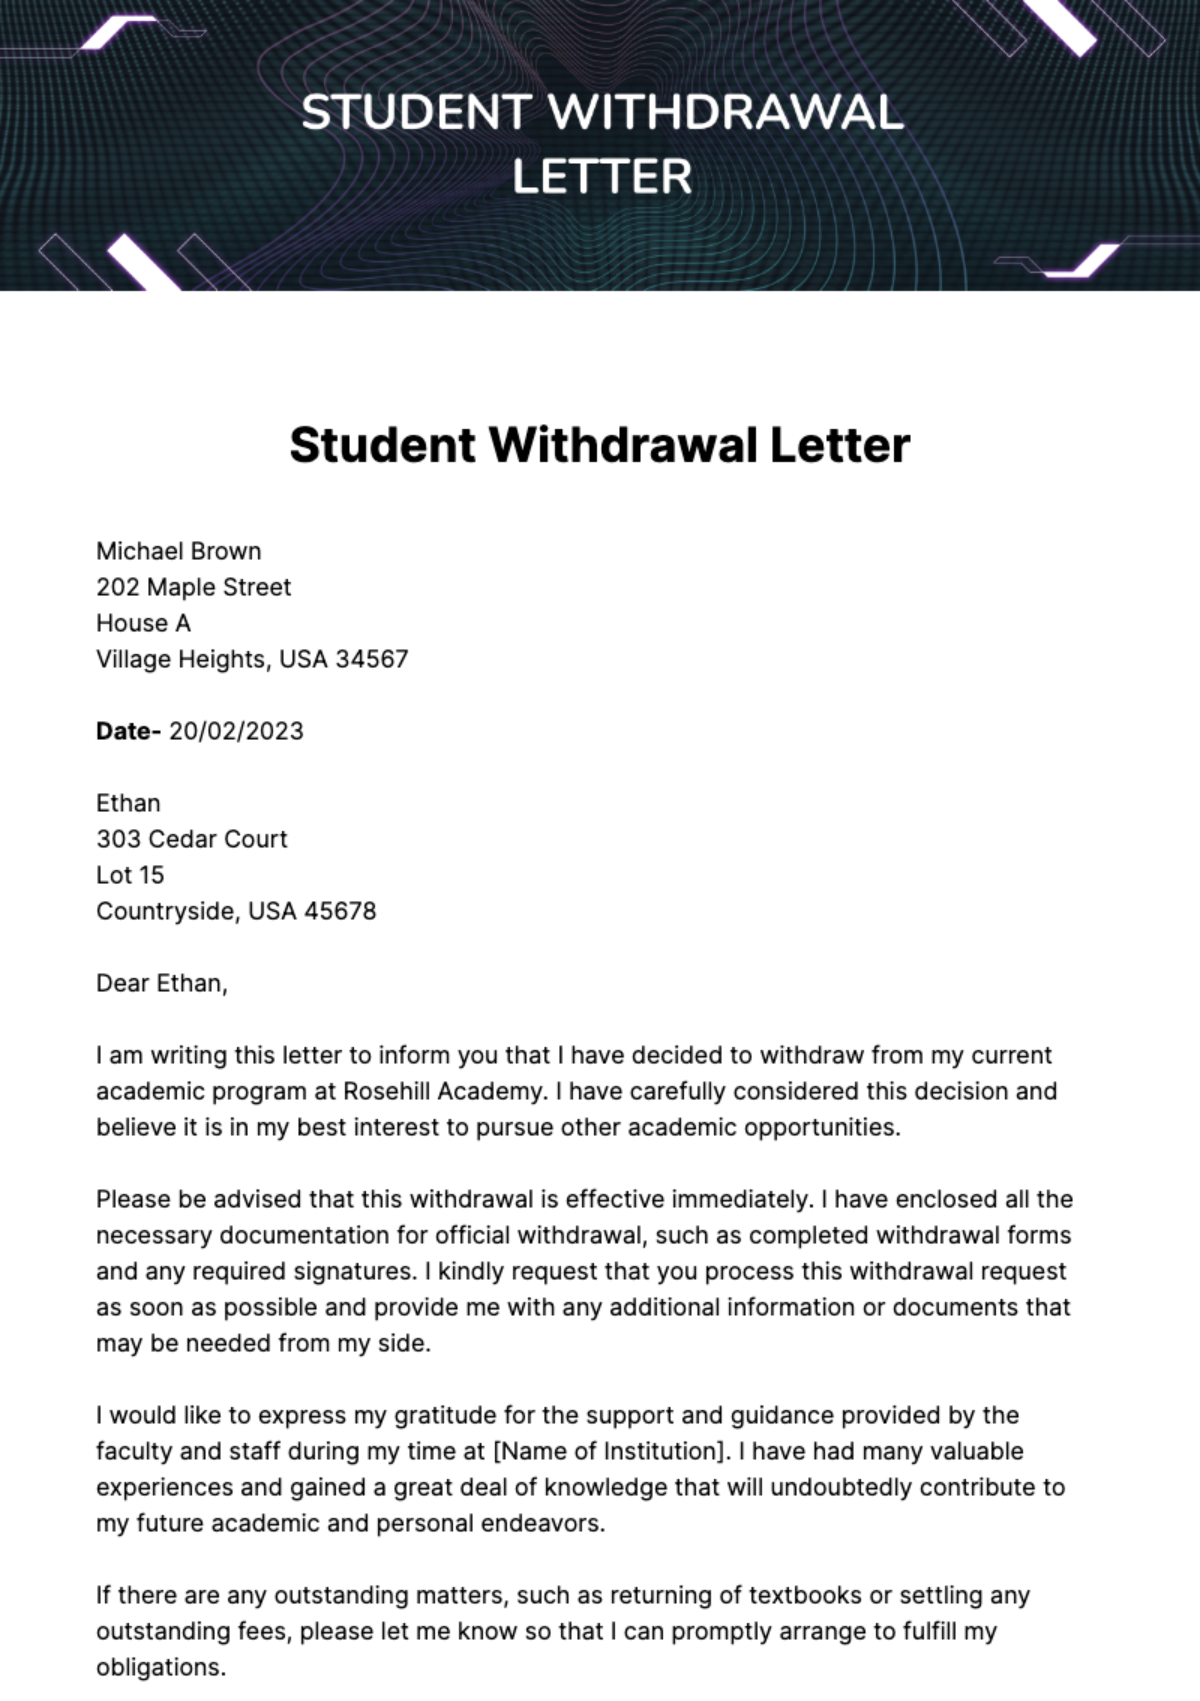 Student Withdrawal Letter Template